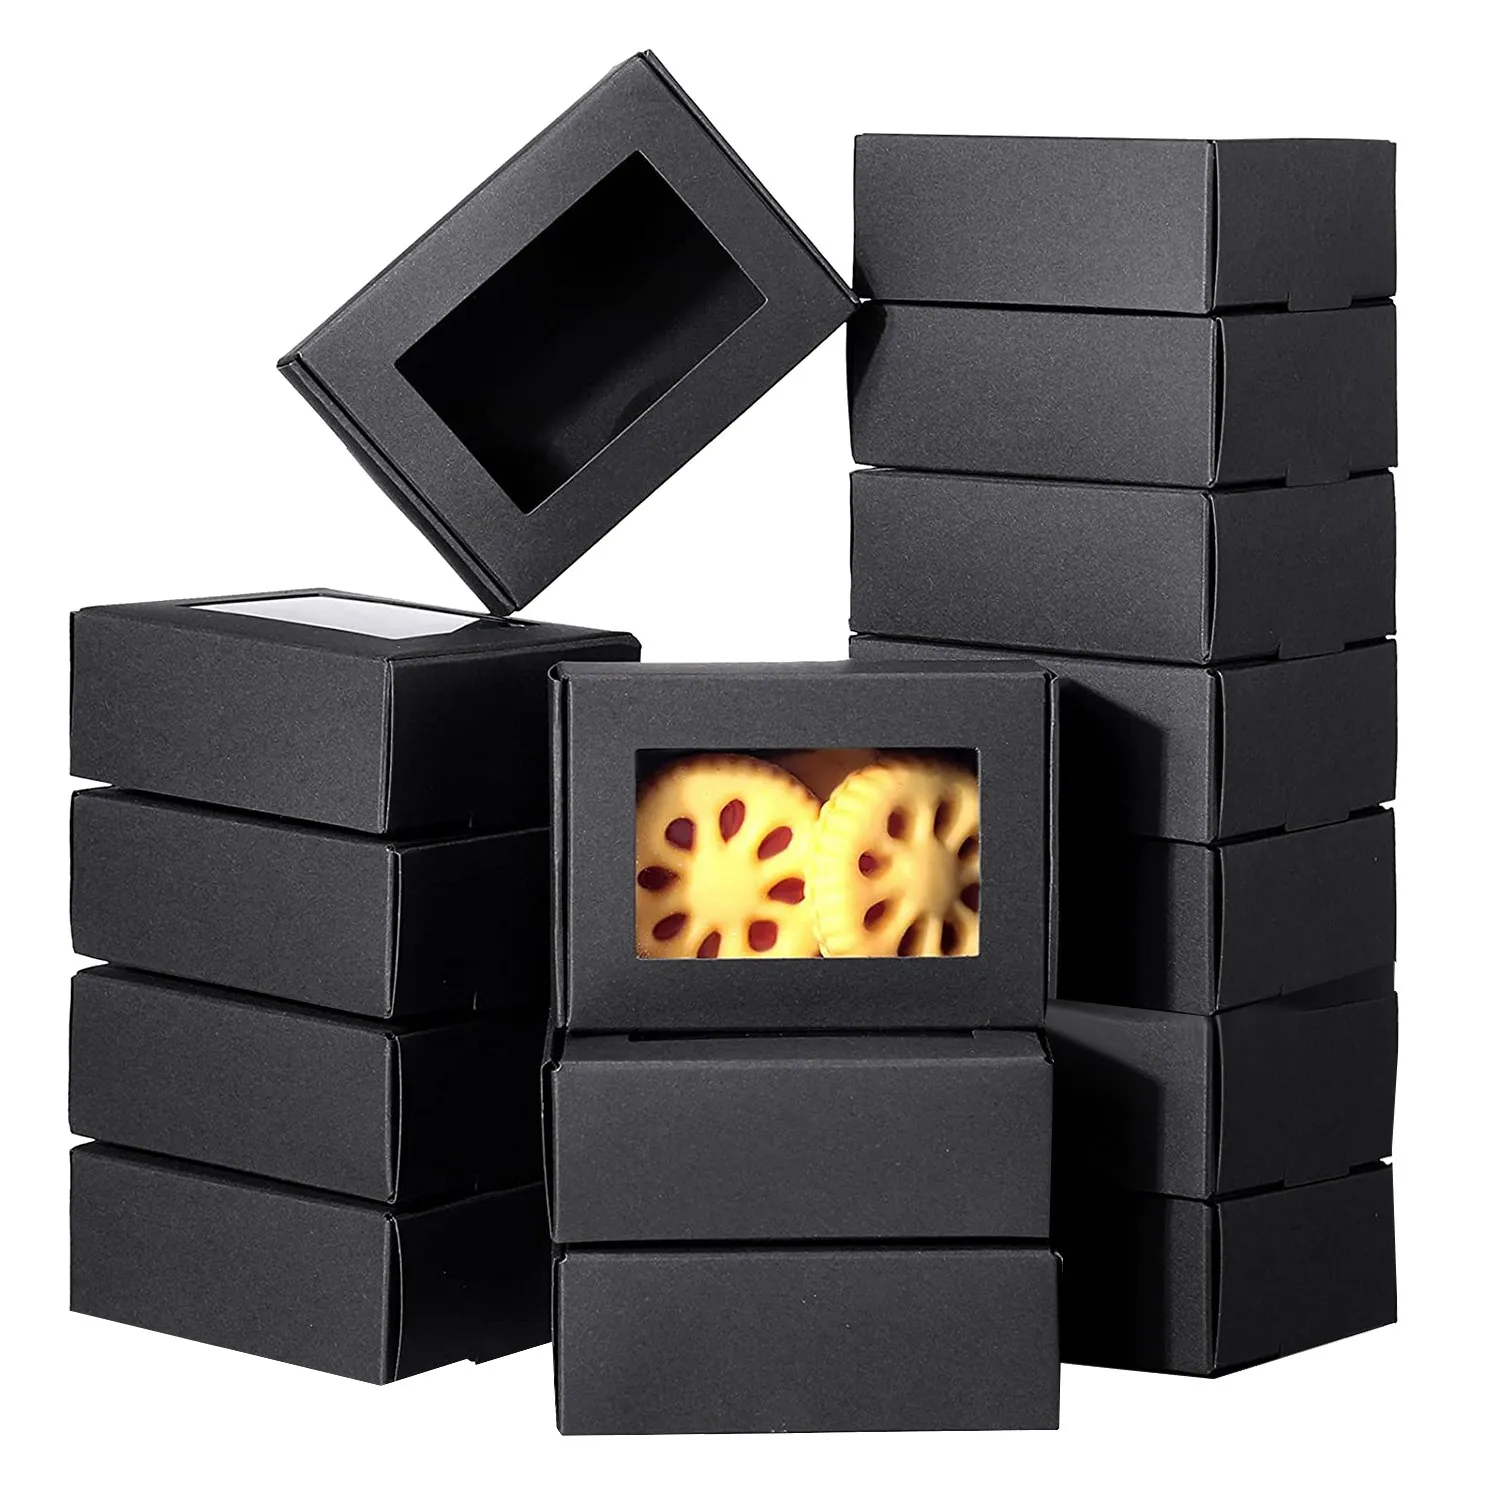 

50 Pcs Mini Kraft Paper Box with Window Present Packaging Box Treat Box for Homemade Soap Treat Bakery Candy (Black)